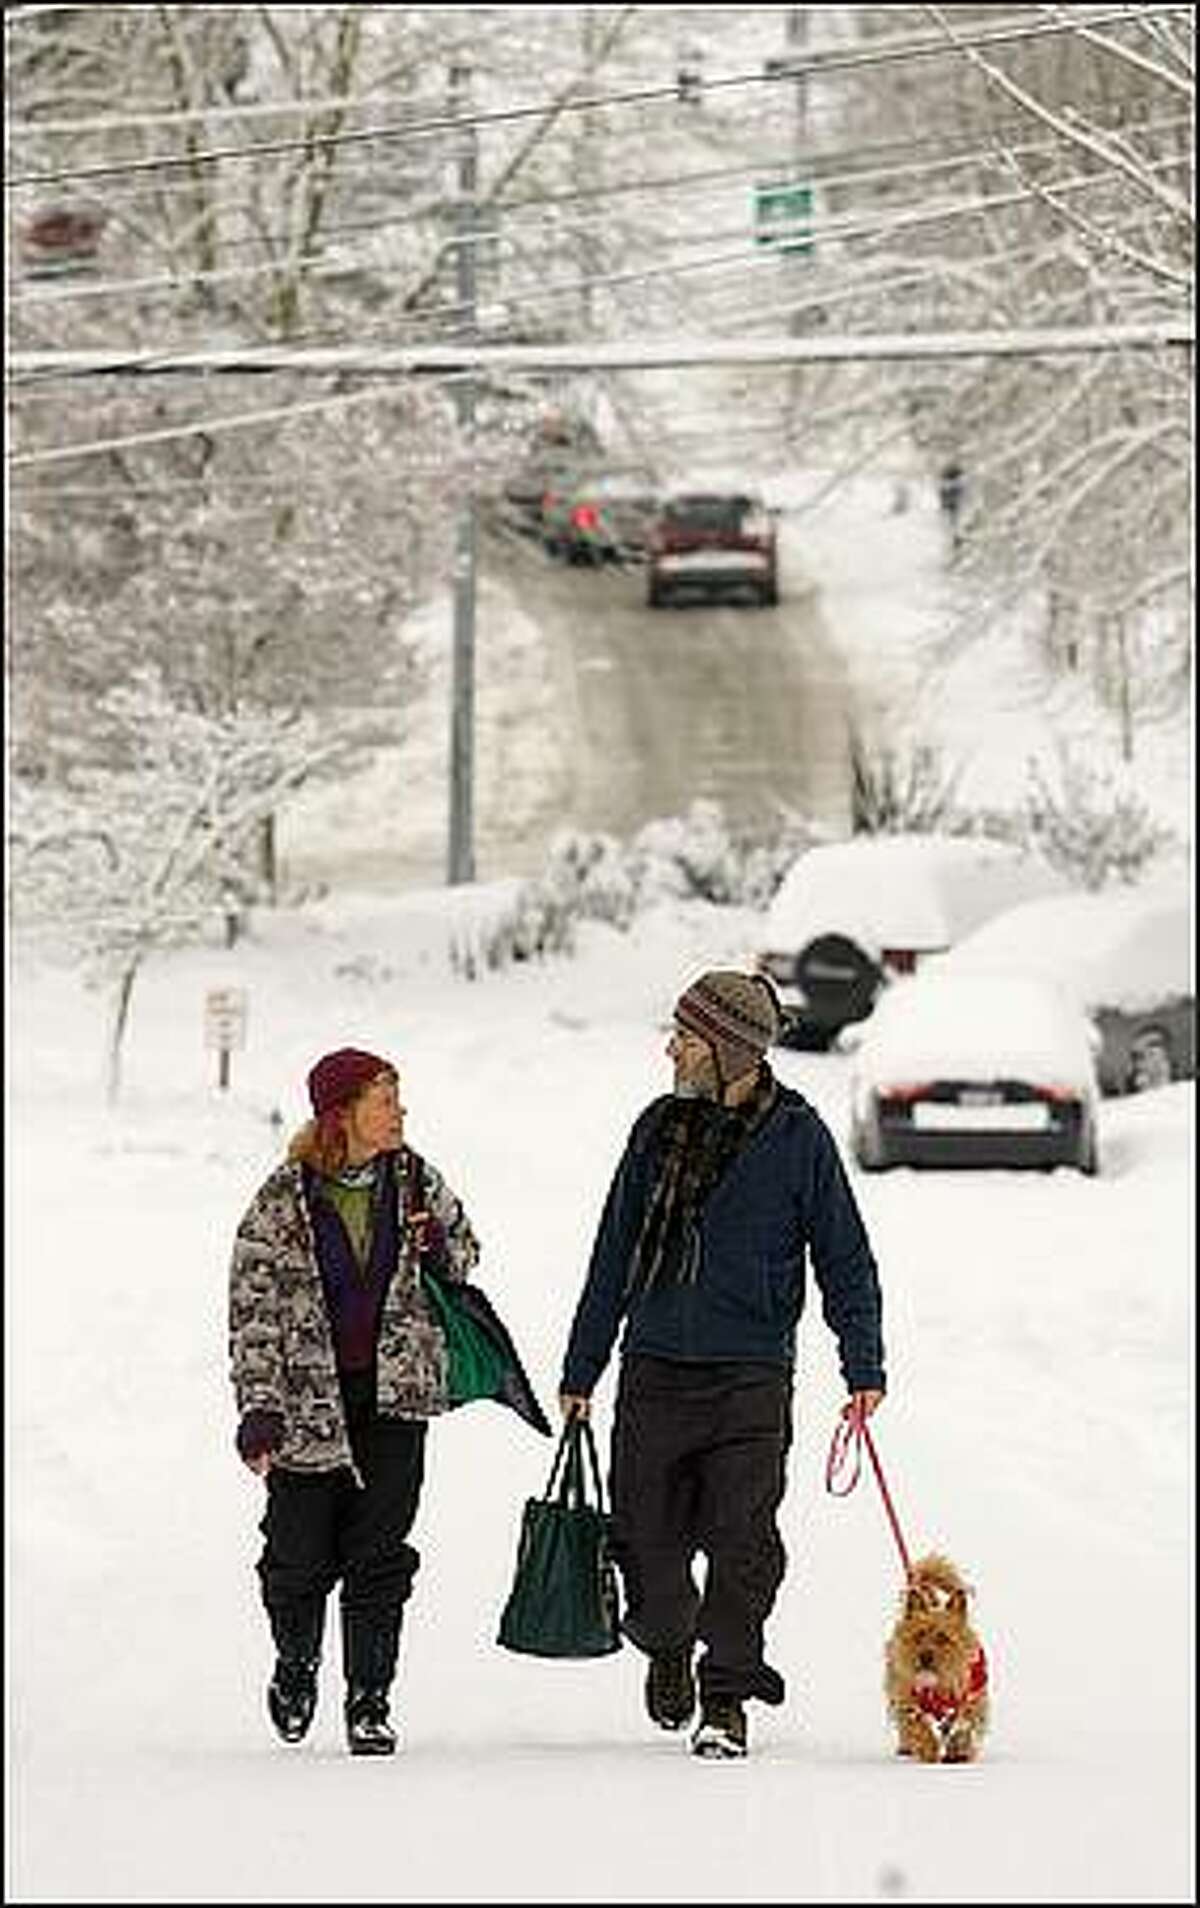 Margaret and Kurt Vance work on their harmonies while walking back to their Wallingford home after getting coffee at a dog-friendly Fremont neighborhood coffee house. With them is Penny, whom they are dog-sitting. The Vances, who sing in their church choir, just took part in a Christmas caroling party, despite the weather. They say that singing together is good for their marriage.